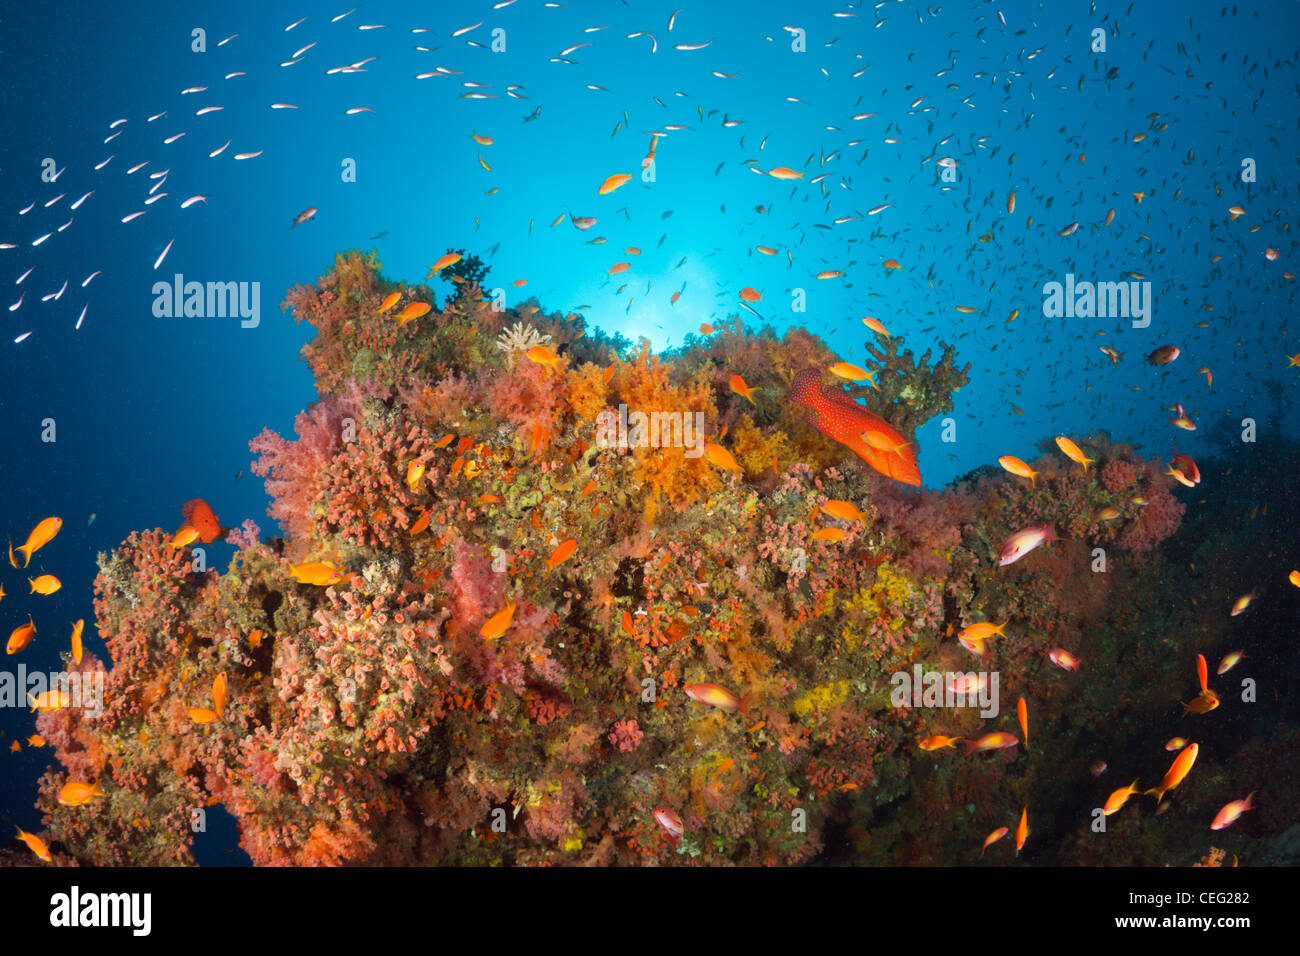 Coral Fishes over Soft Coral Reef, Baa Atoll, Indian Ocean, Maldives ...